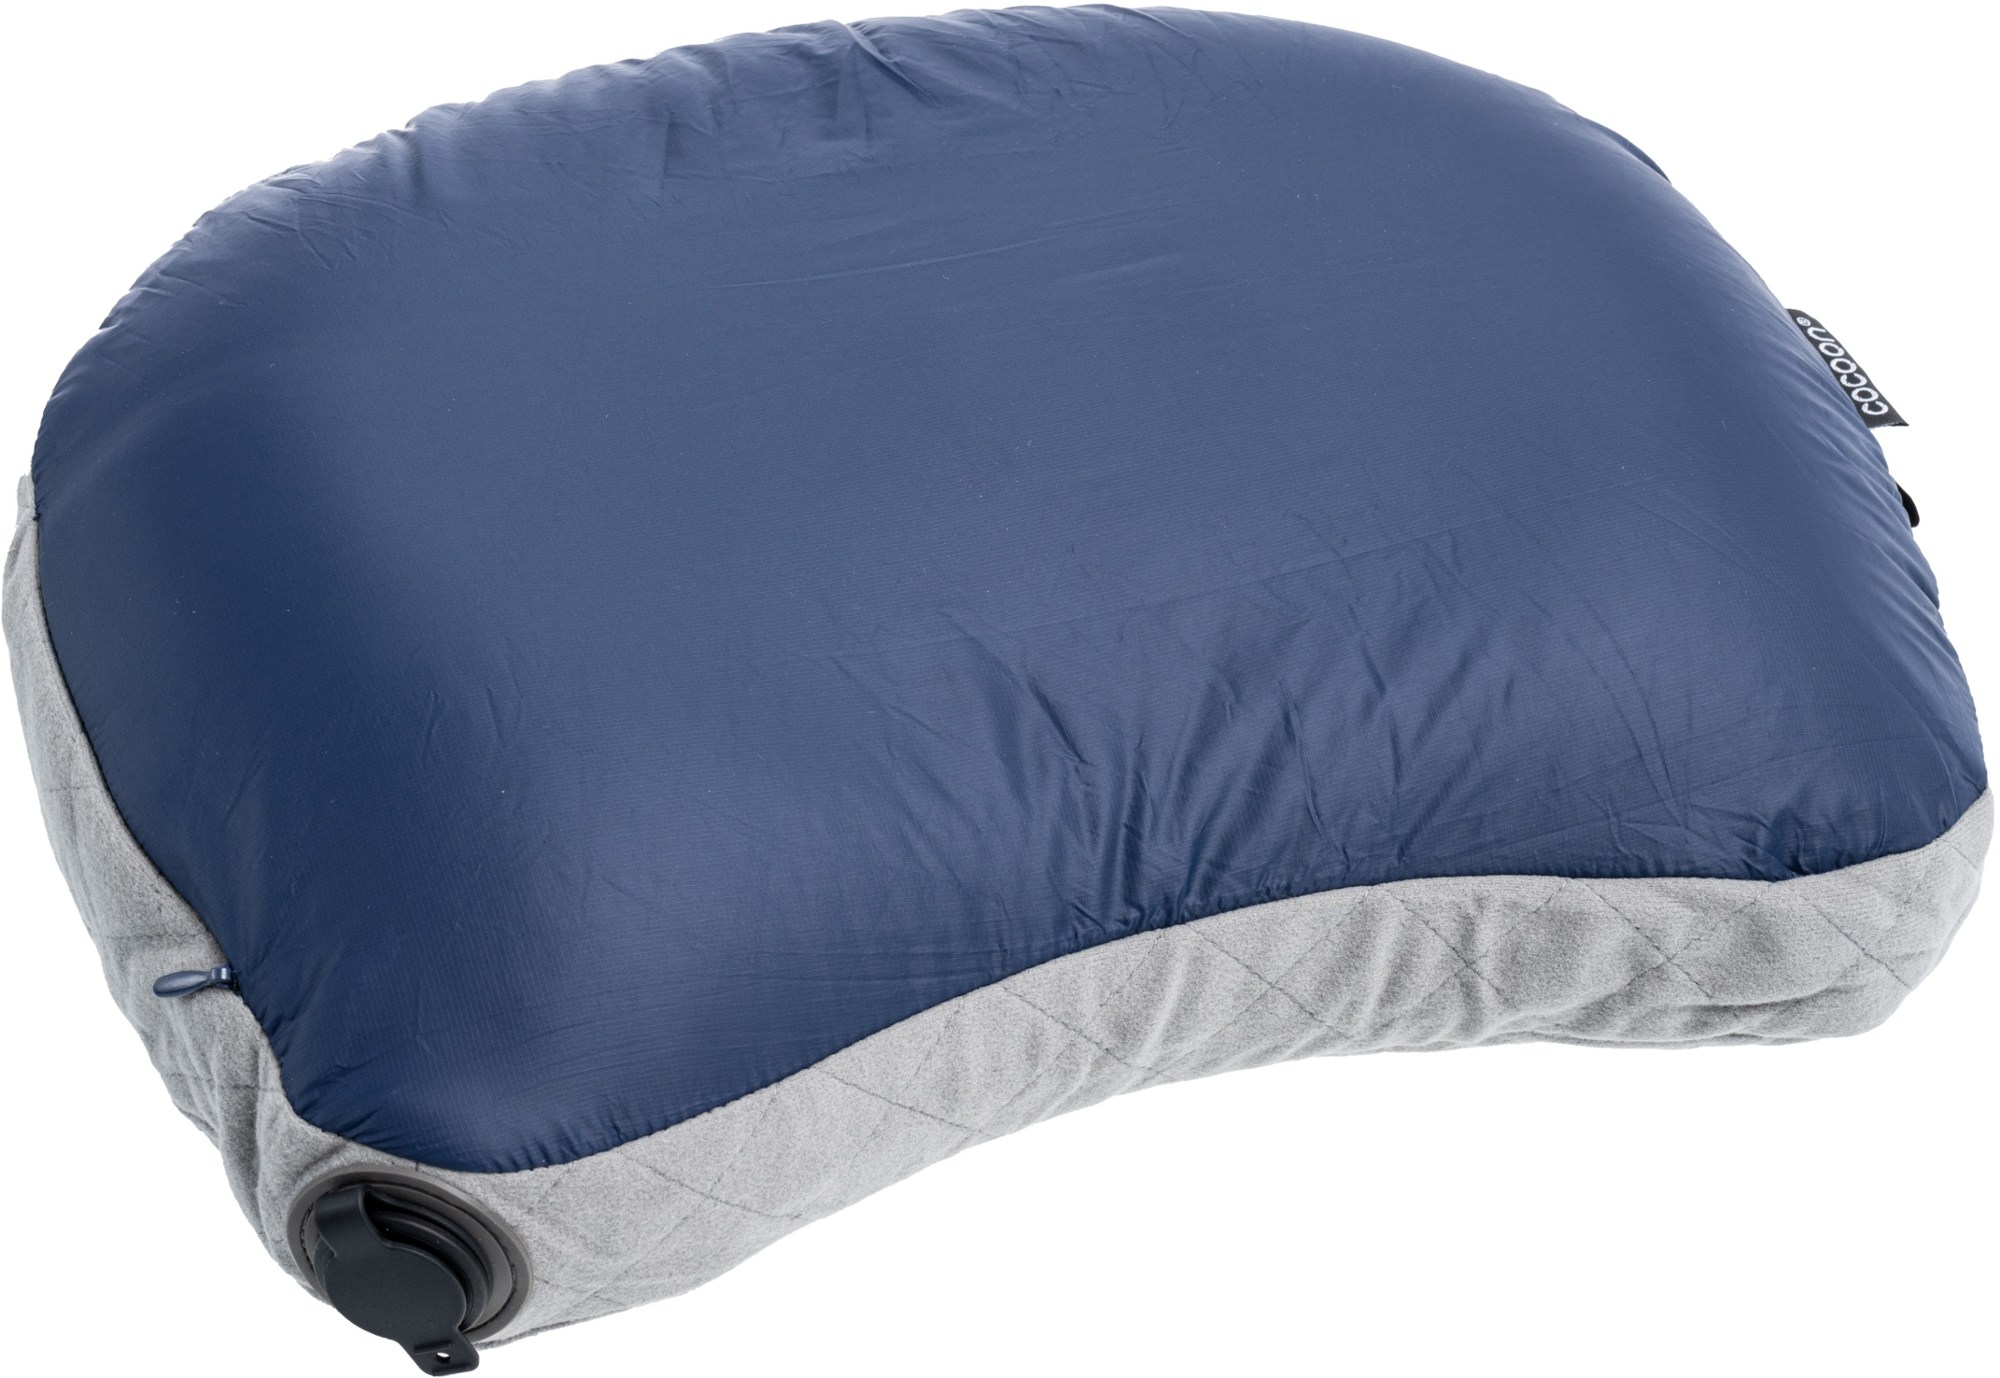 Cocoon AirCore Hood camping pillow